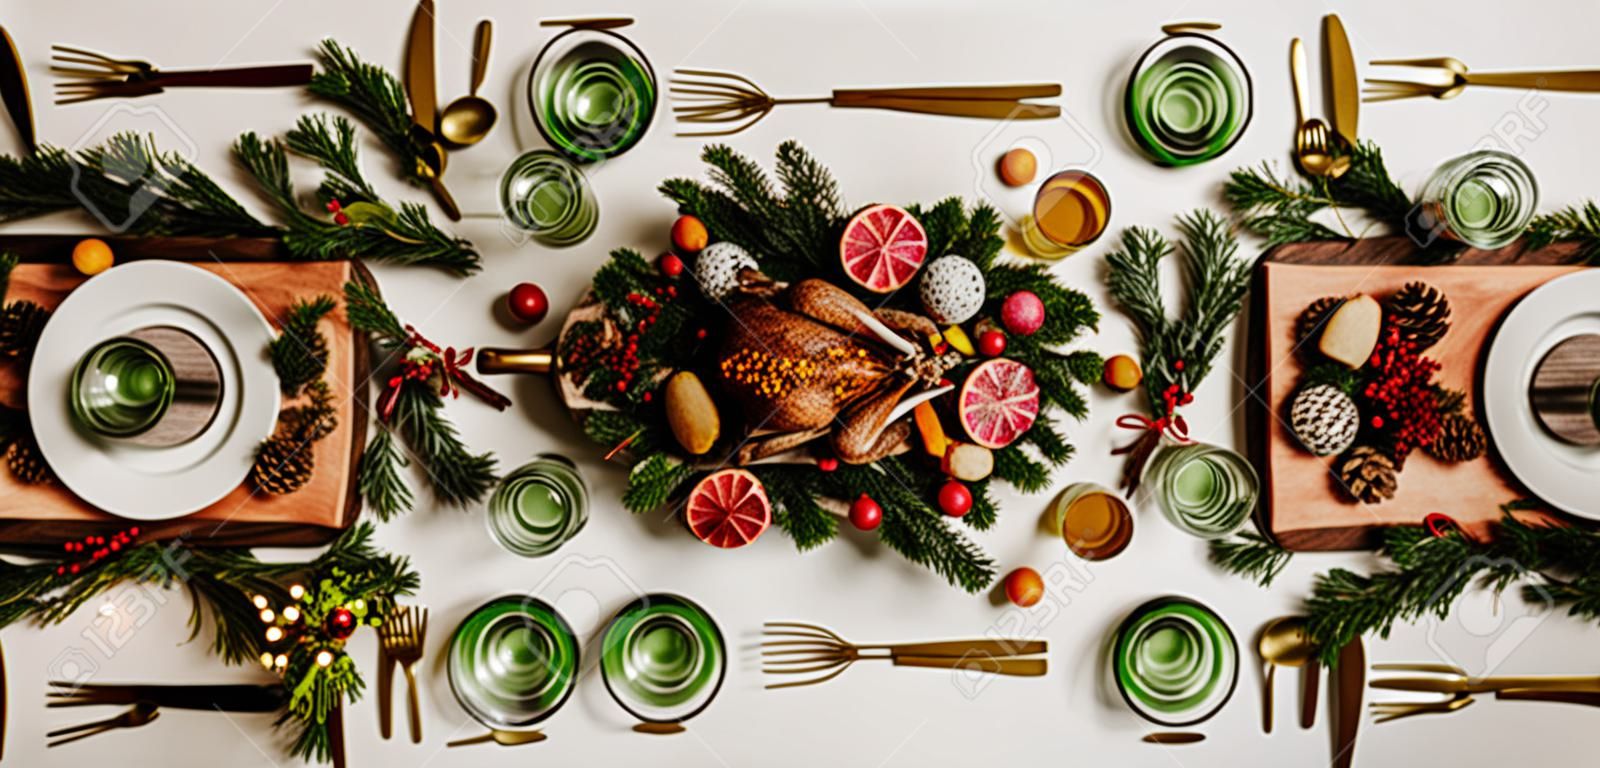 Flat-lay of Festive Christmas table setting over white background